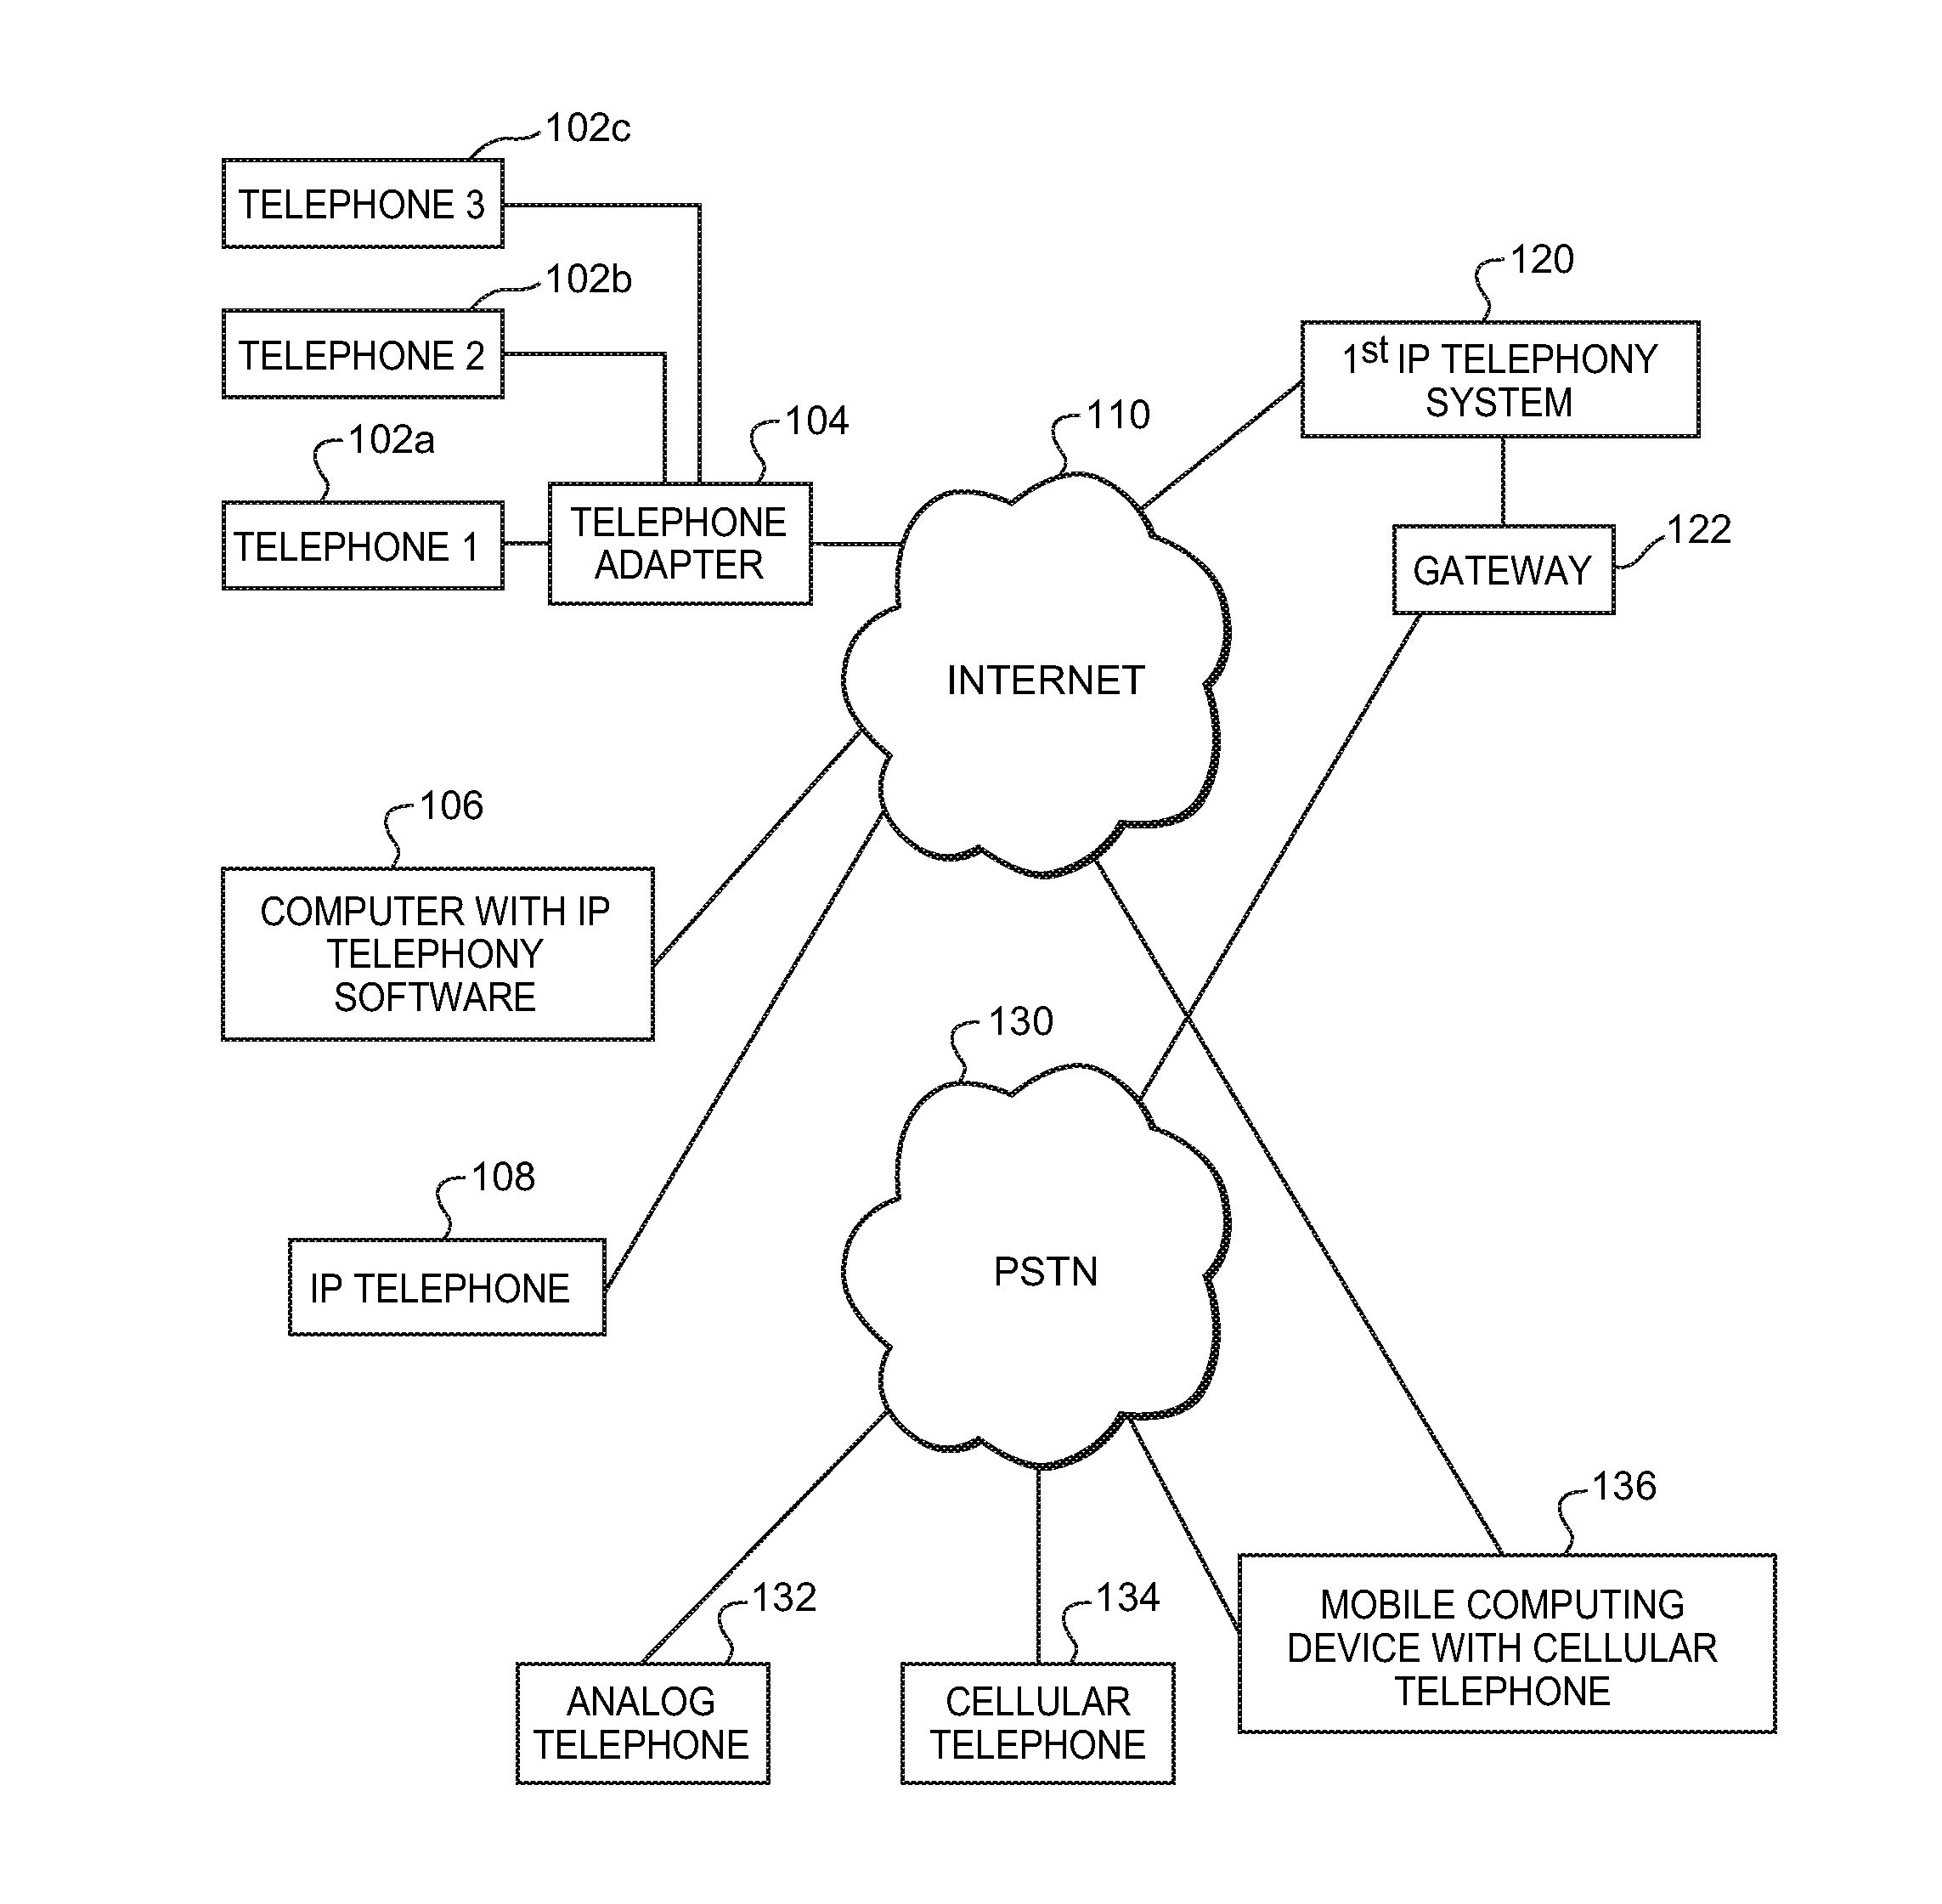 Systems and methods of monitoring call quality